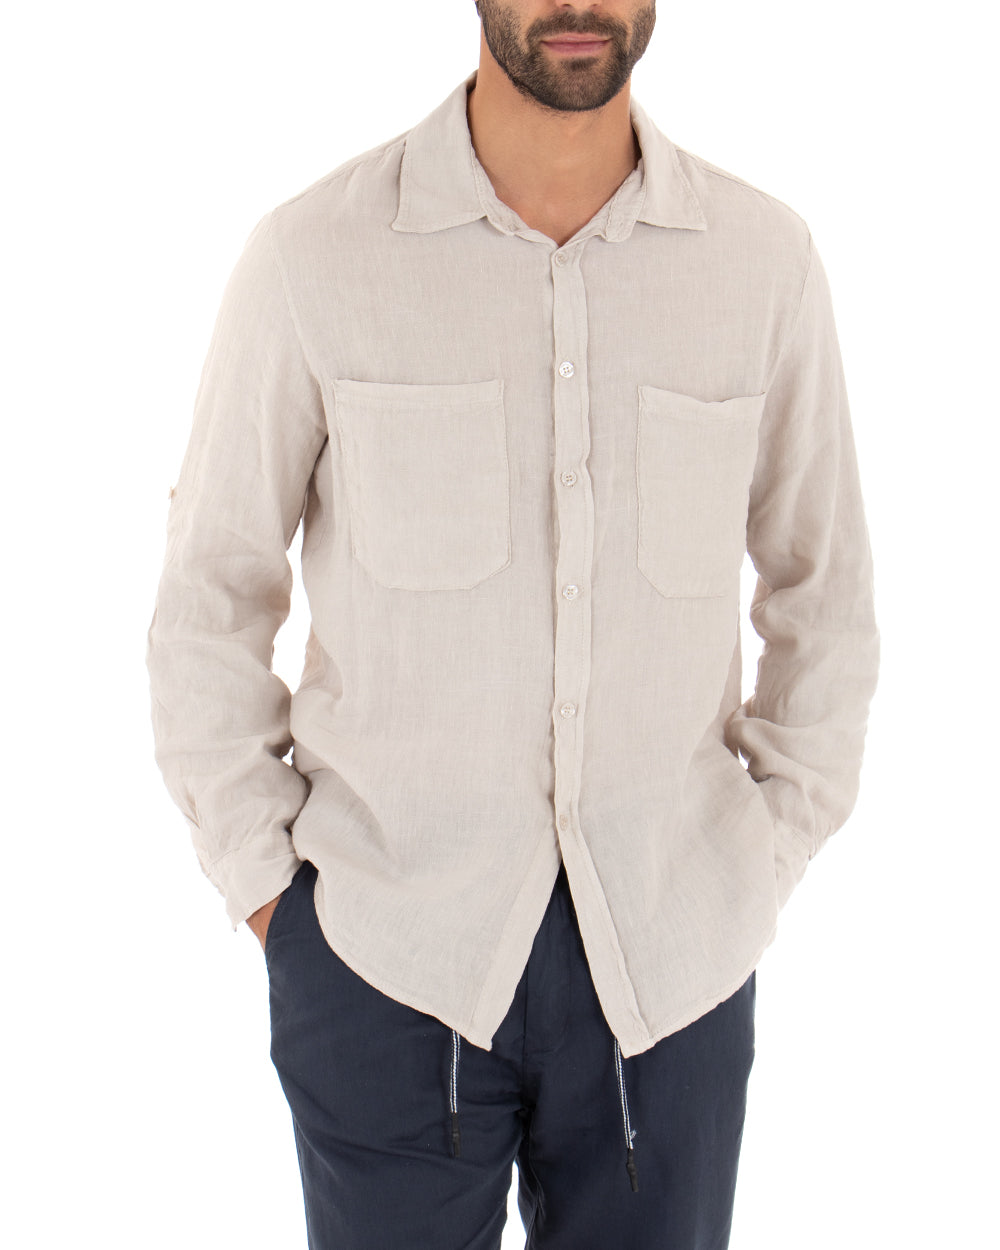 Men's Shirt With Collar Long Sleeve Linen Solid Color Beige GIOSAL-C1989A